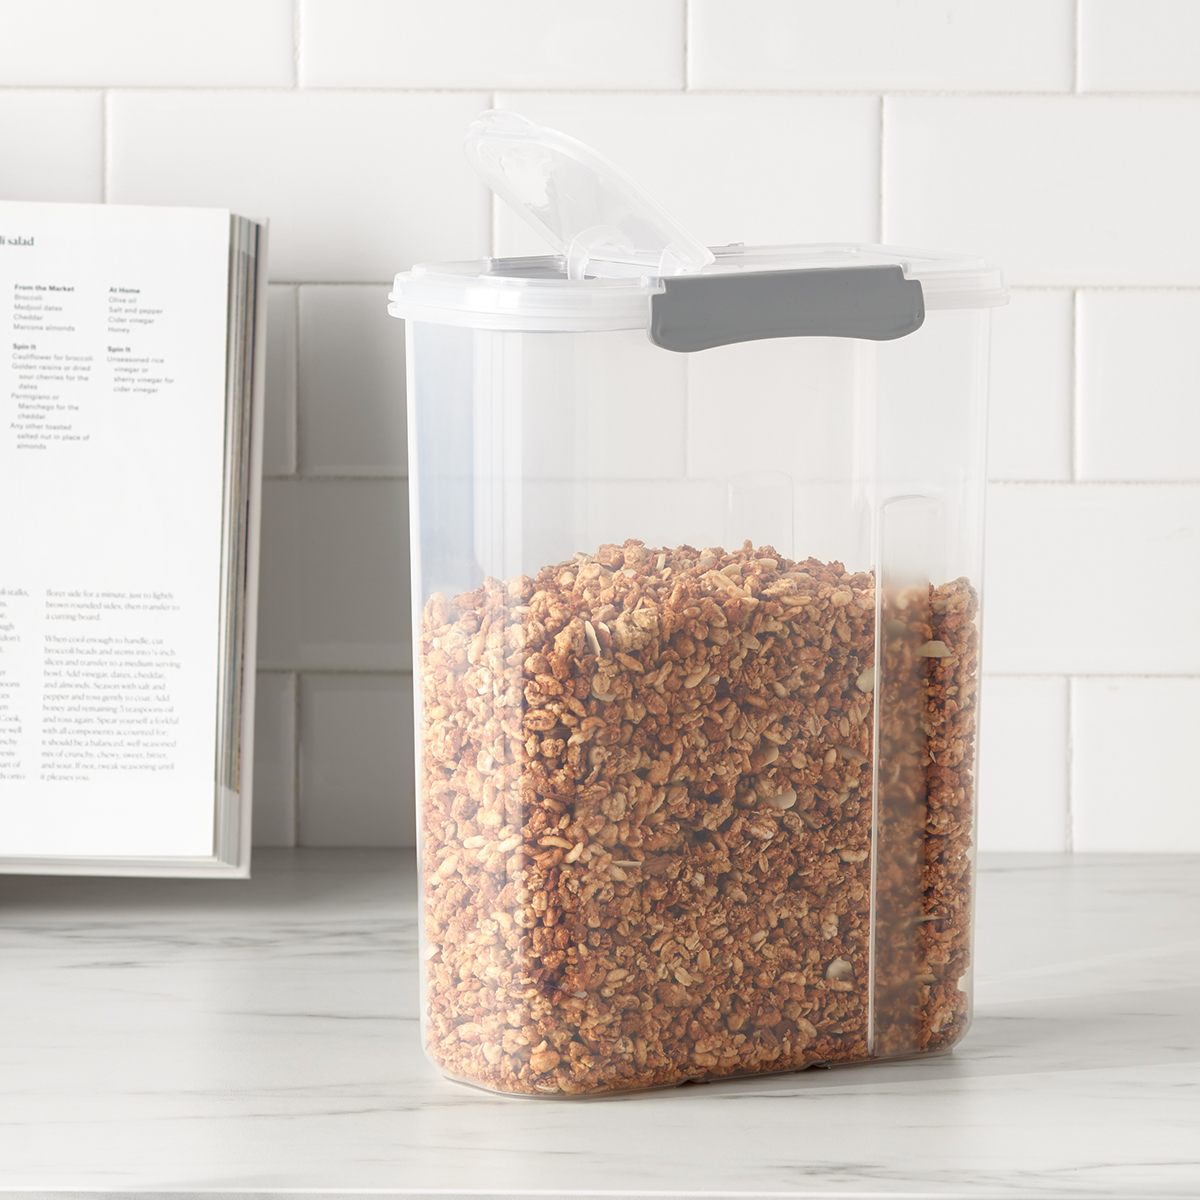 https://www.containerstore.com/catalogimages/416494/10083920-4.5qt-cereal-dispenser-grey.jpg